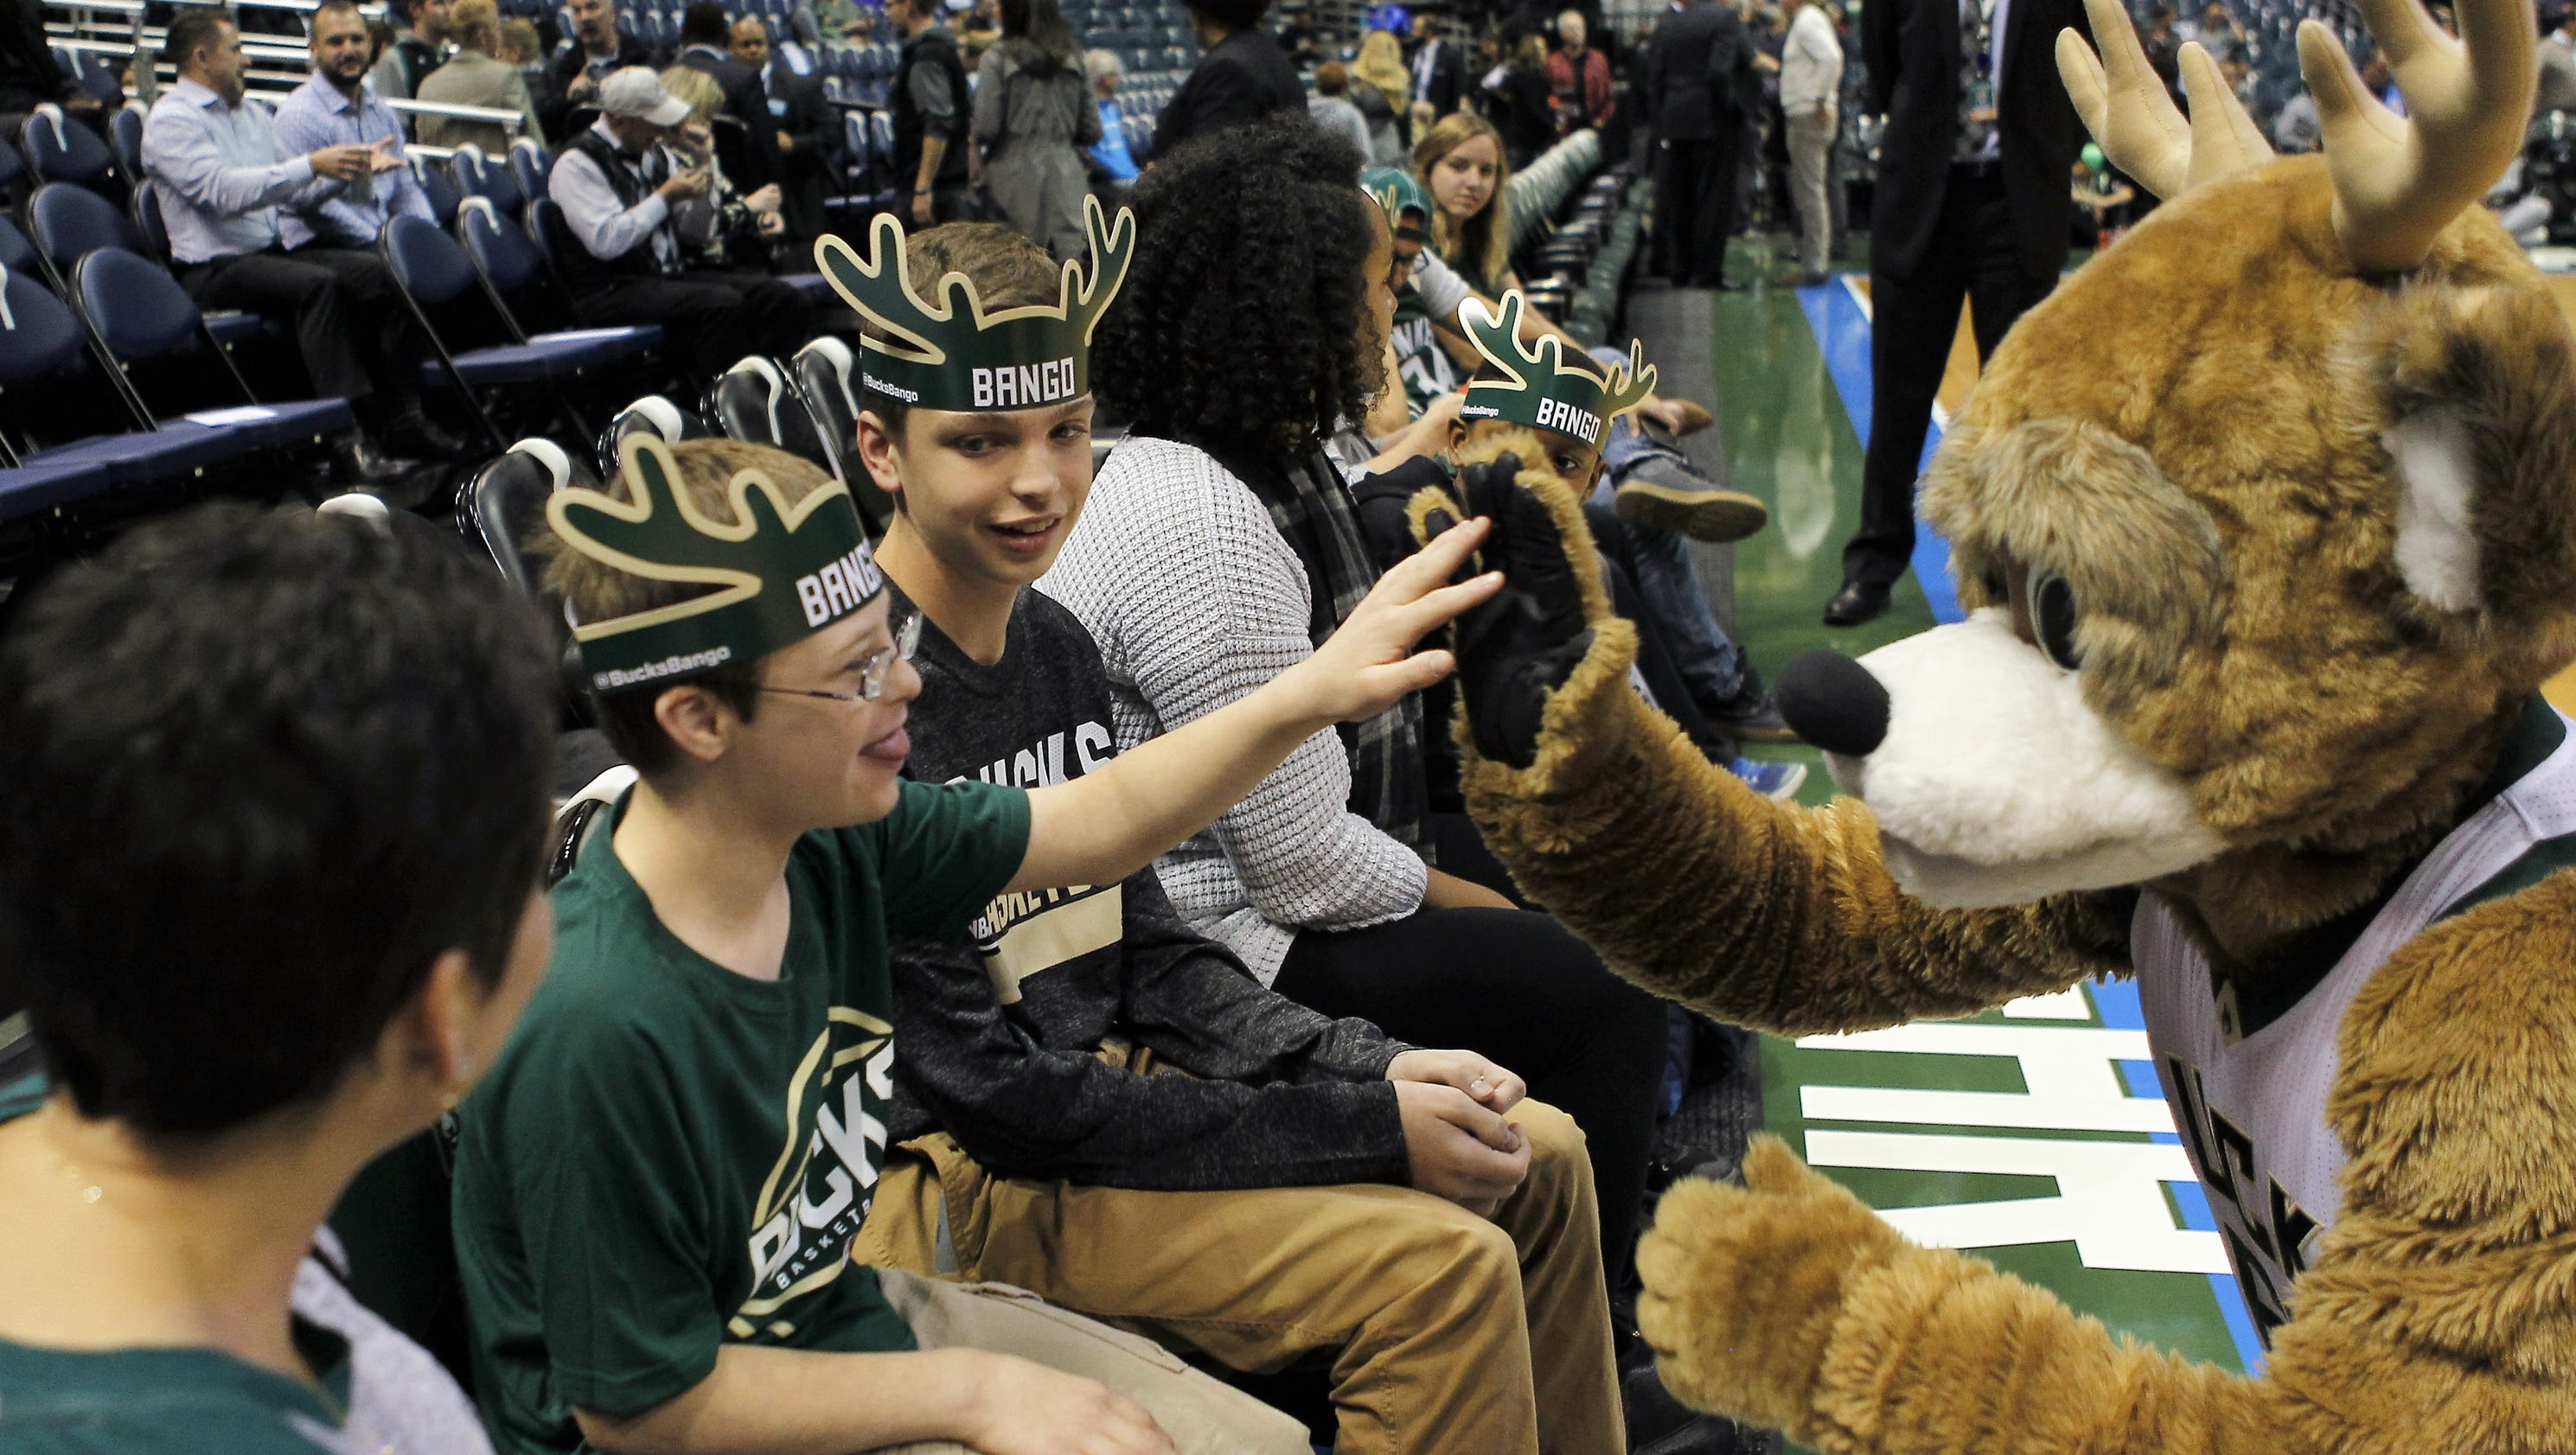 Bucks fans sporting gear get priority boarding from Delta Airlines - Milwaukee Journal Sentinel